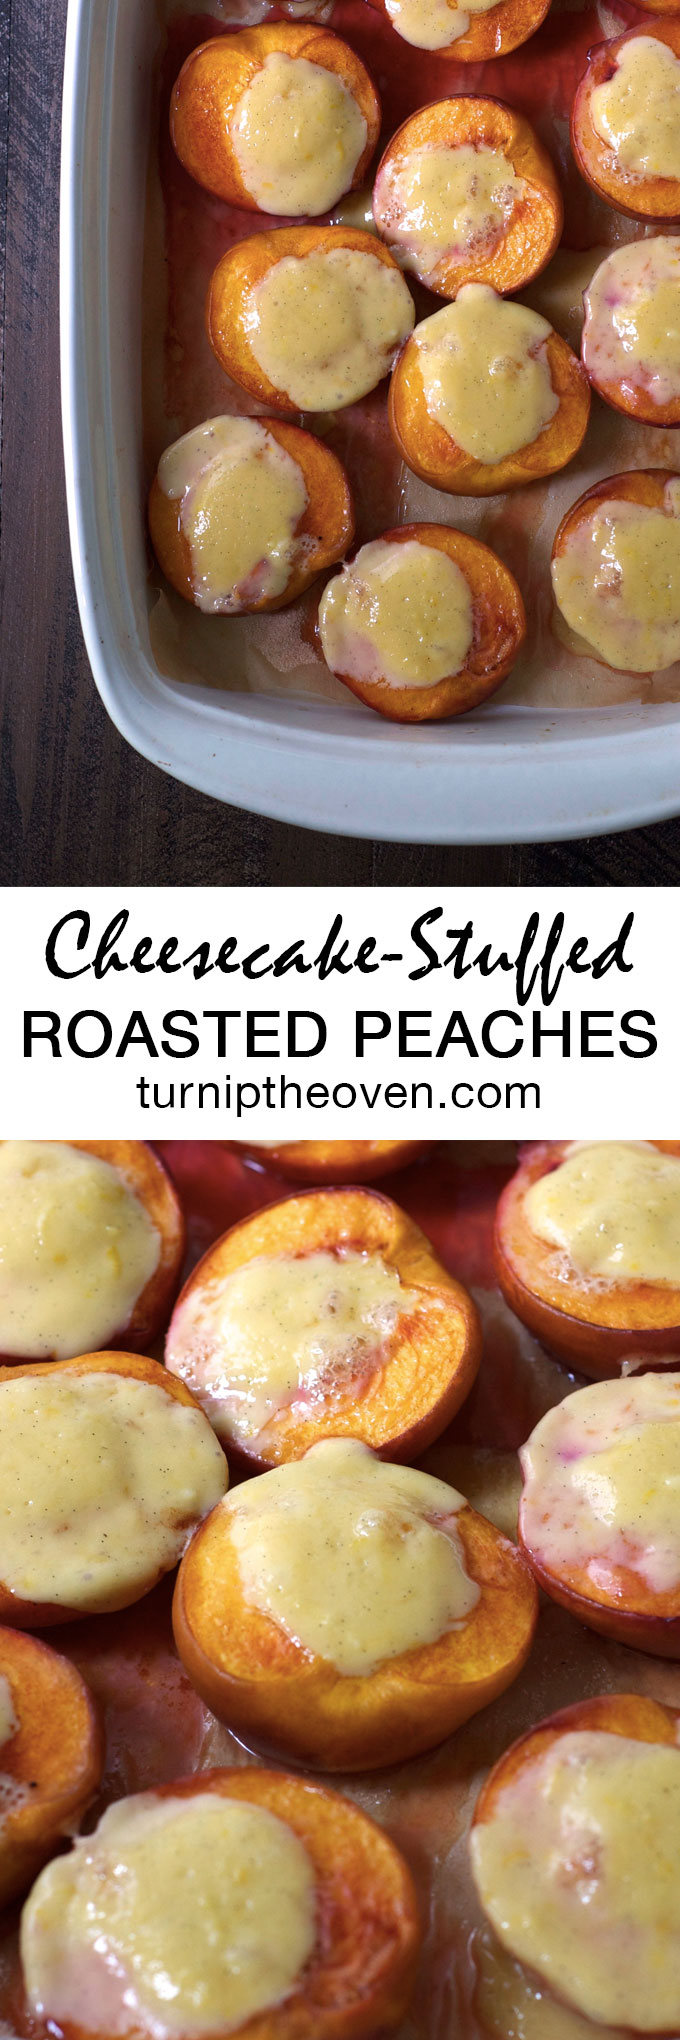 Roasted Peaches with Cheesecake Stuffing